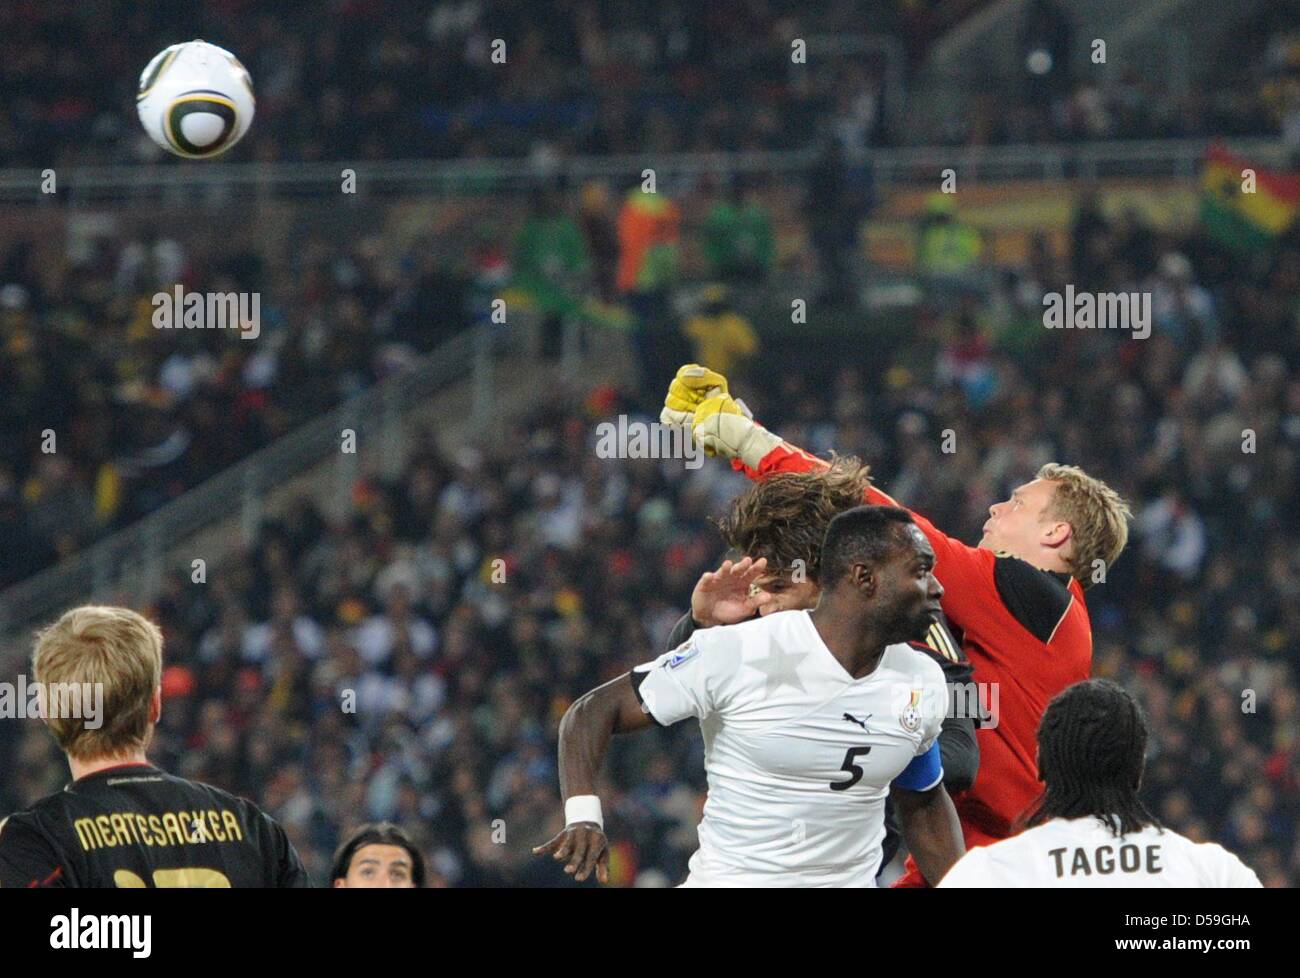 Germany's goalkeeper Manuel Neuer saves against Ghana's John Mensah during the 2010 FIFA World Cup group D match between Ghana and Germany at Soccer City, Johannesburg, South Africa 23 June 2010. Photo: Marcus Brandt dpa - Please refer to http://dpaq.de/FIFA-WM2010-TC  +++(c) dpa - Bildfunk+++ Stock Photo